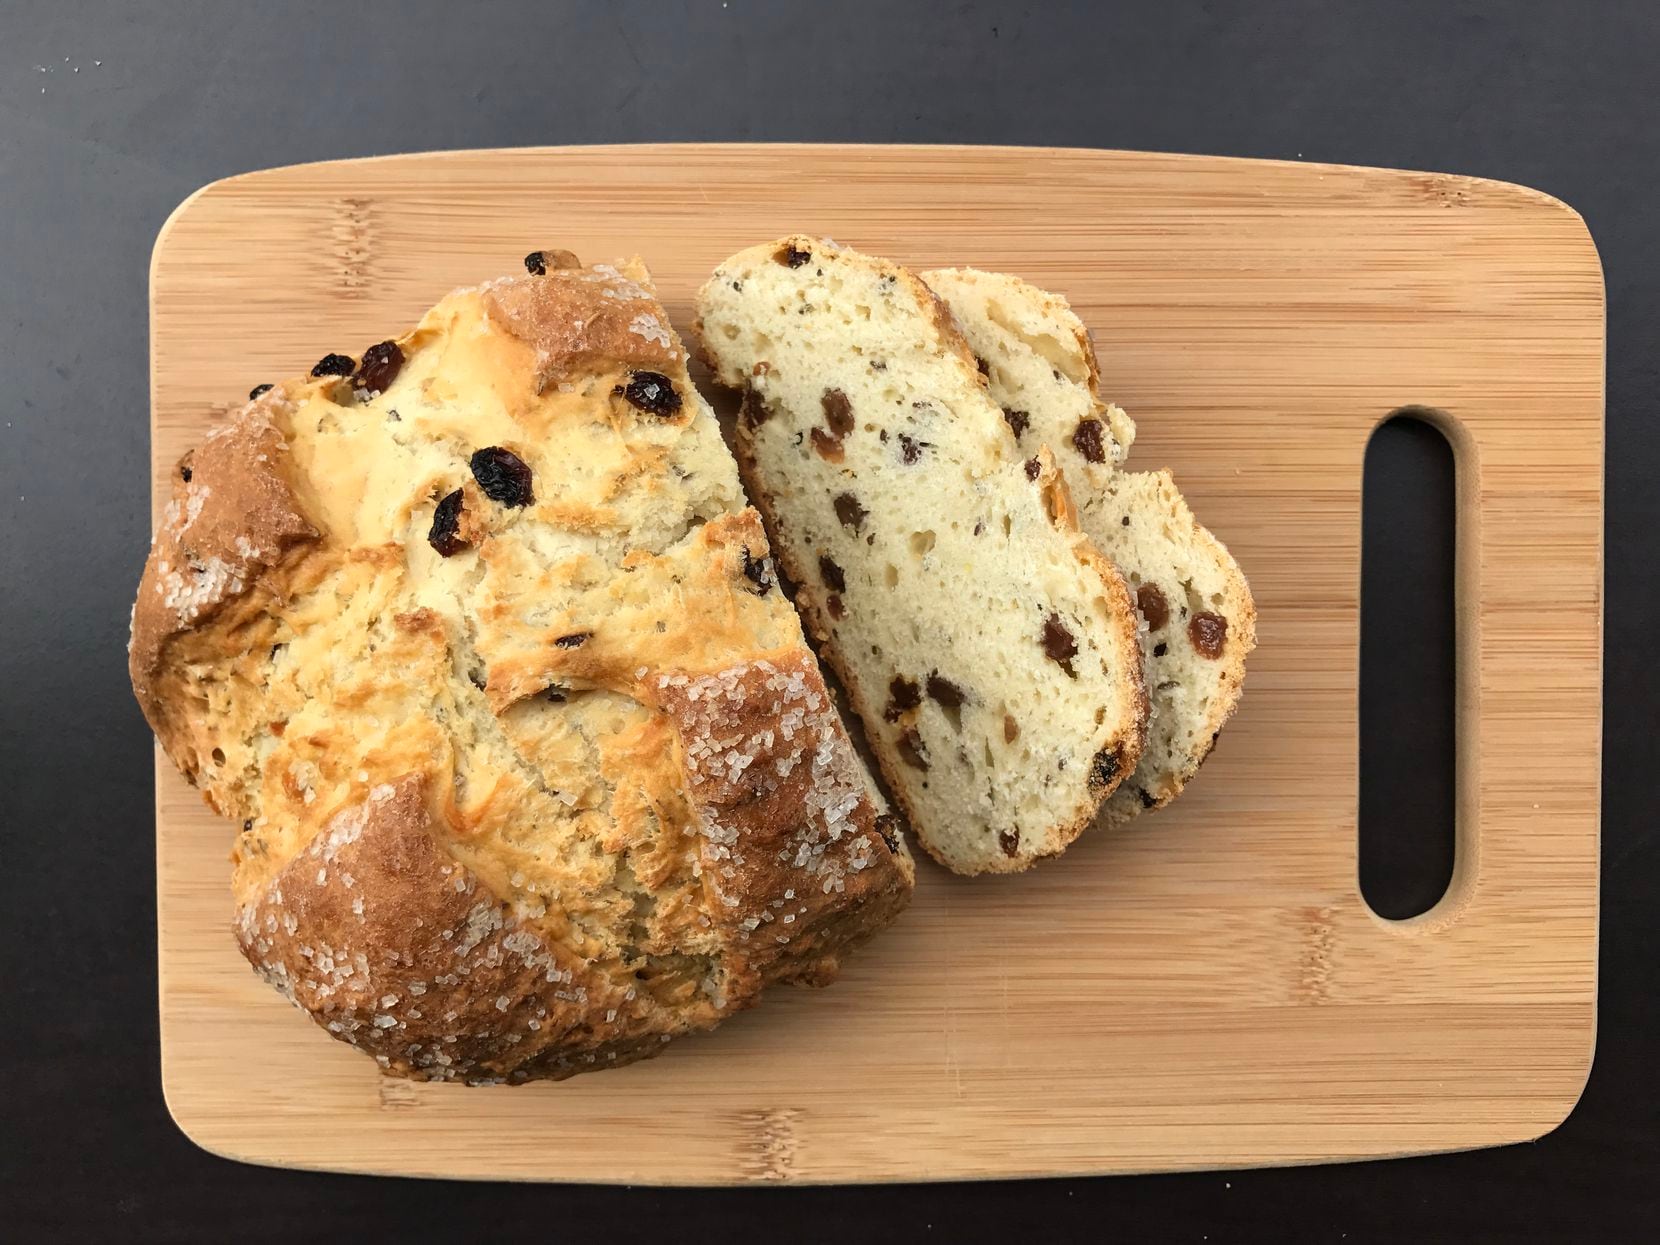 Eatzi's is offering a to-go menu with Irish soda bread with raisins and caraway seeds,...